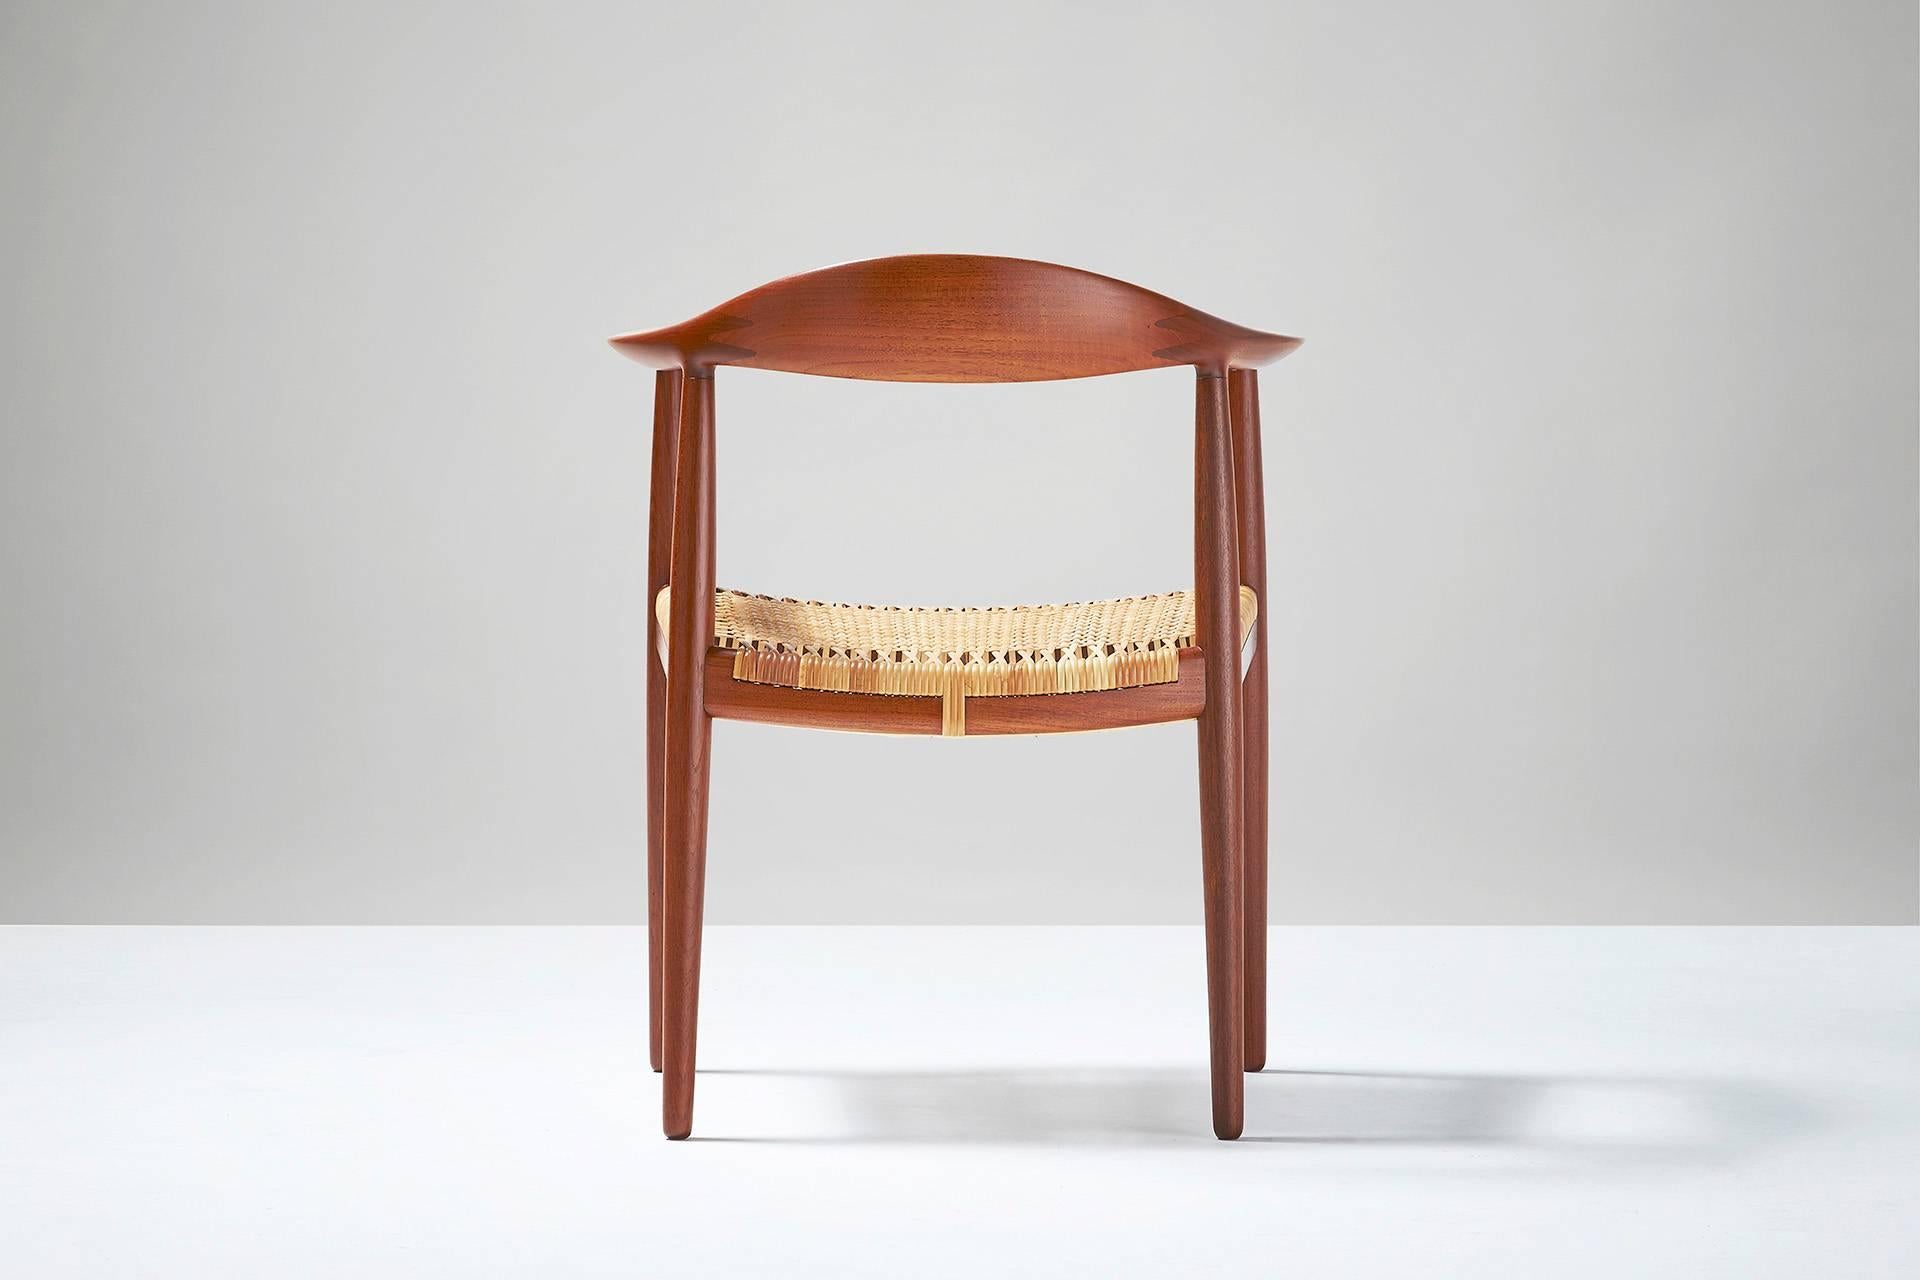 Teak frame with woven rattan seat and back. Rare early model of this iconic Wegner design. Produced by Johannes Hansen, Denmark. Minor breaks in rattan weave.